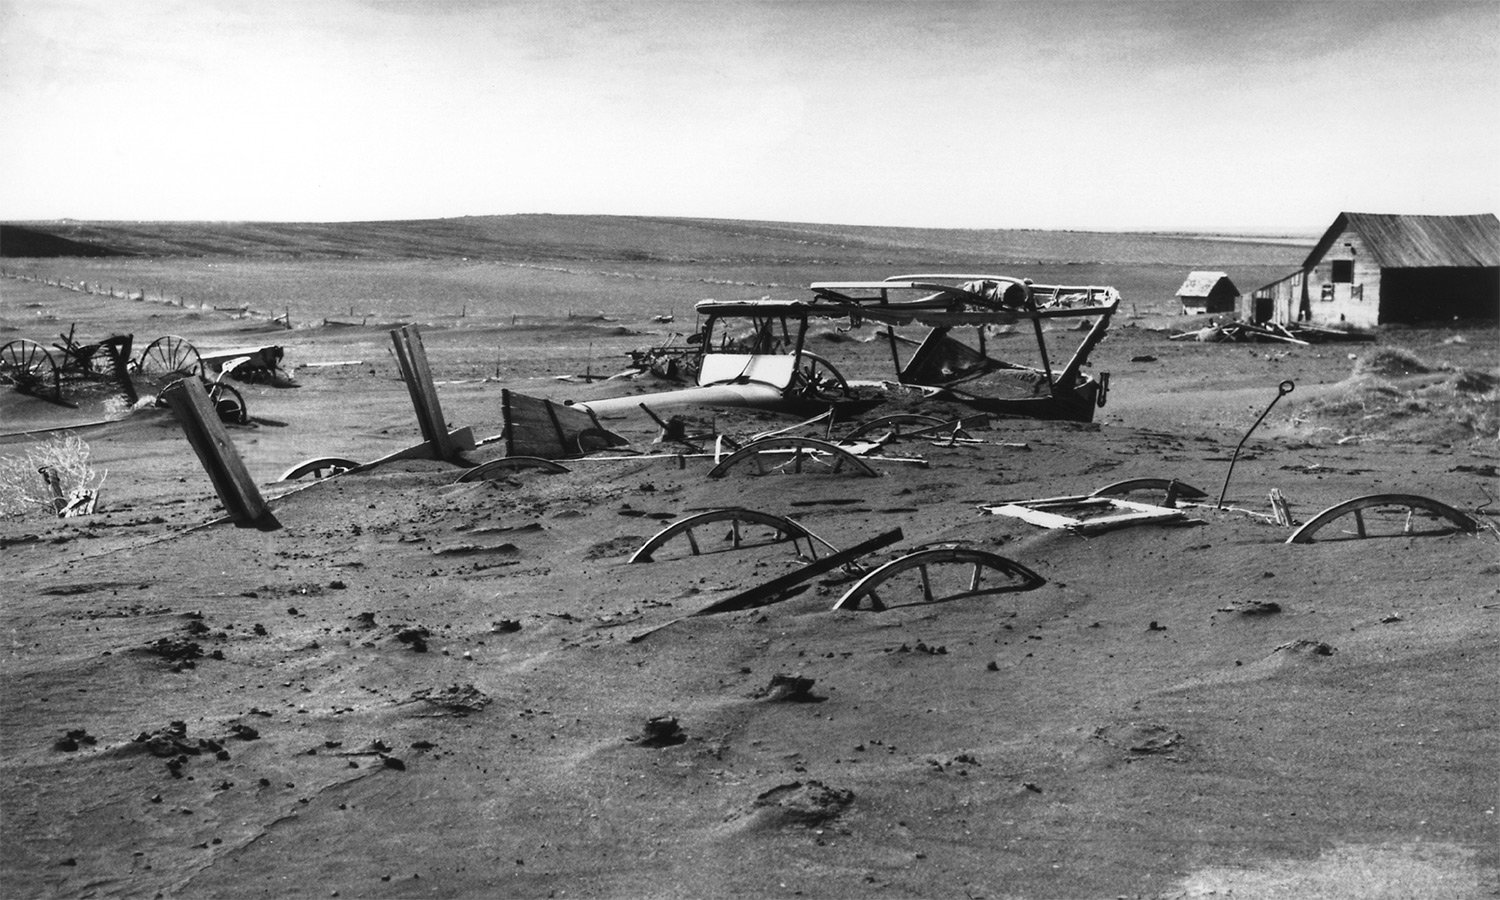 farm equipment buried in eroded soil in the Dust Bowl